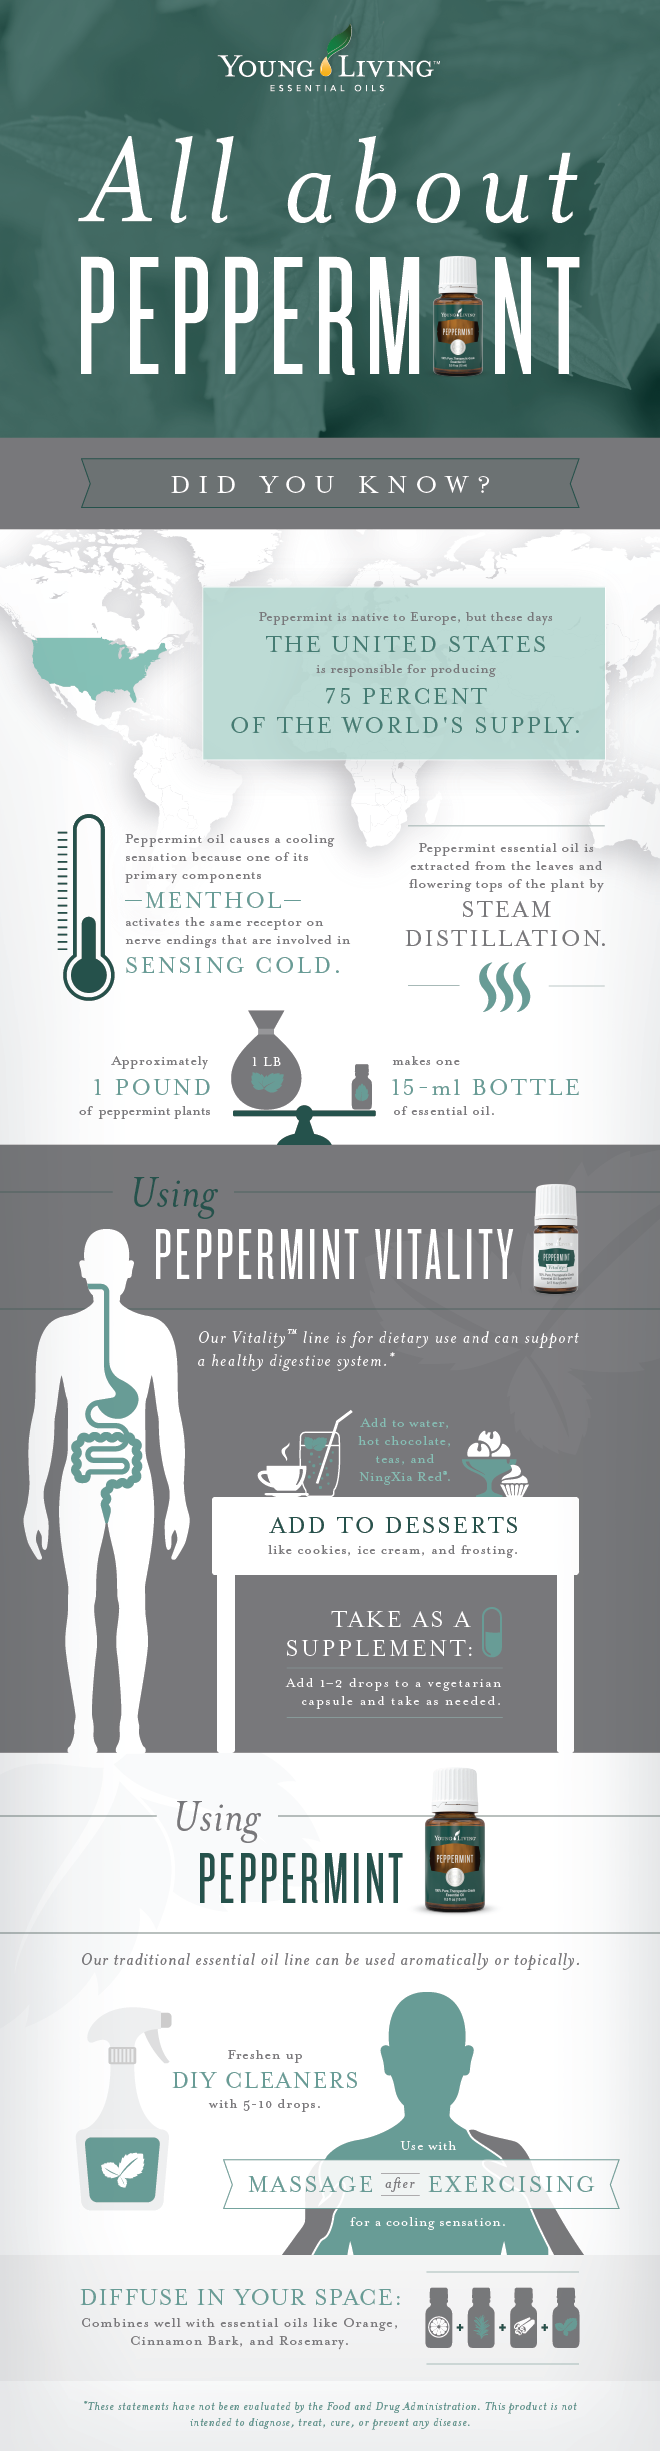 Young Living Peppermint Essential Oil and Peppermint Vitality Essential Oil - peppermint uses, peppermint oil